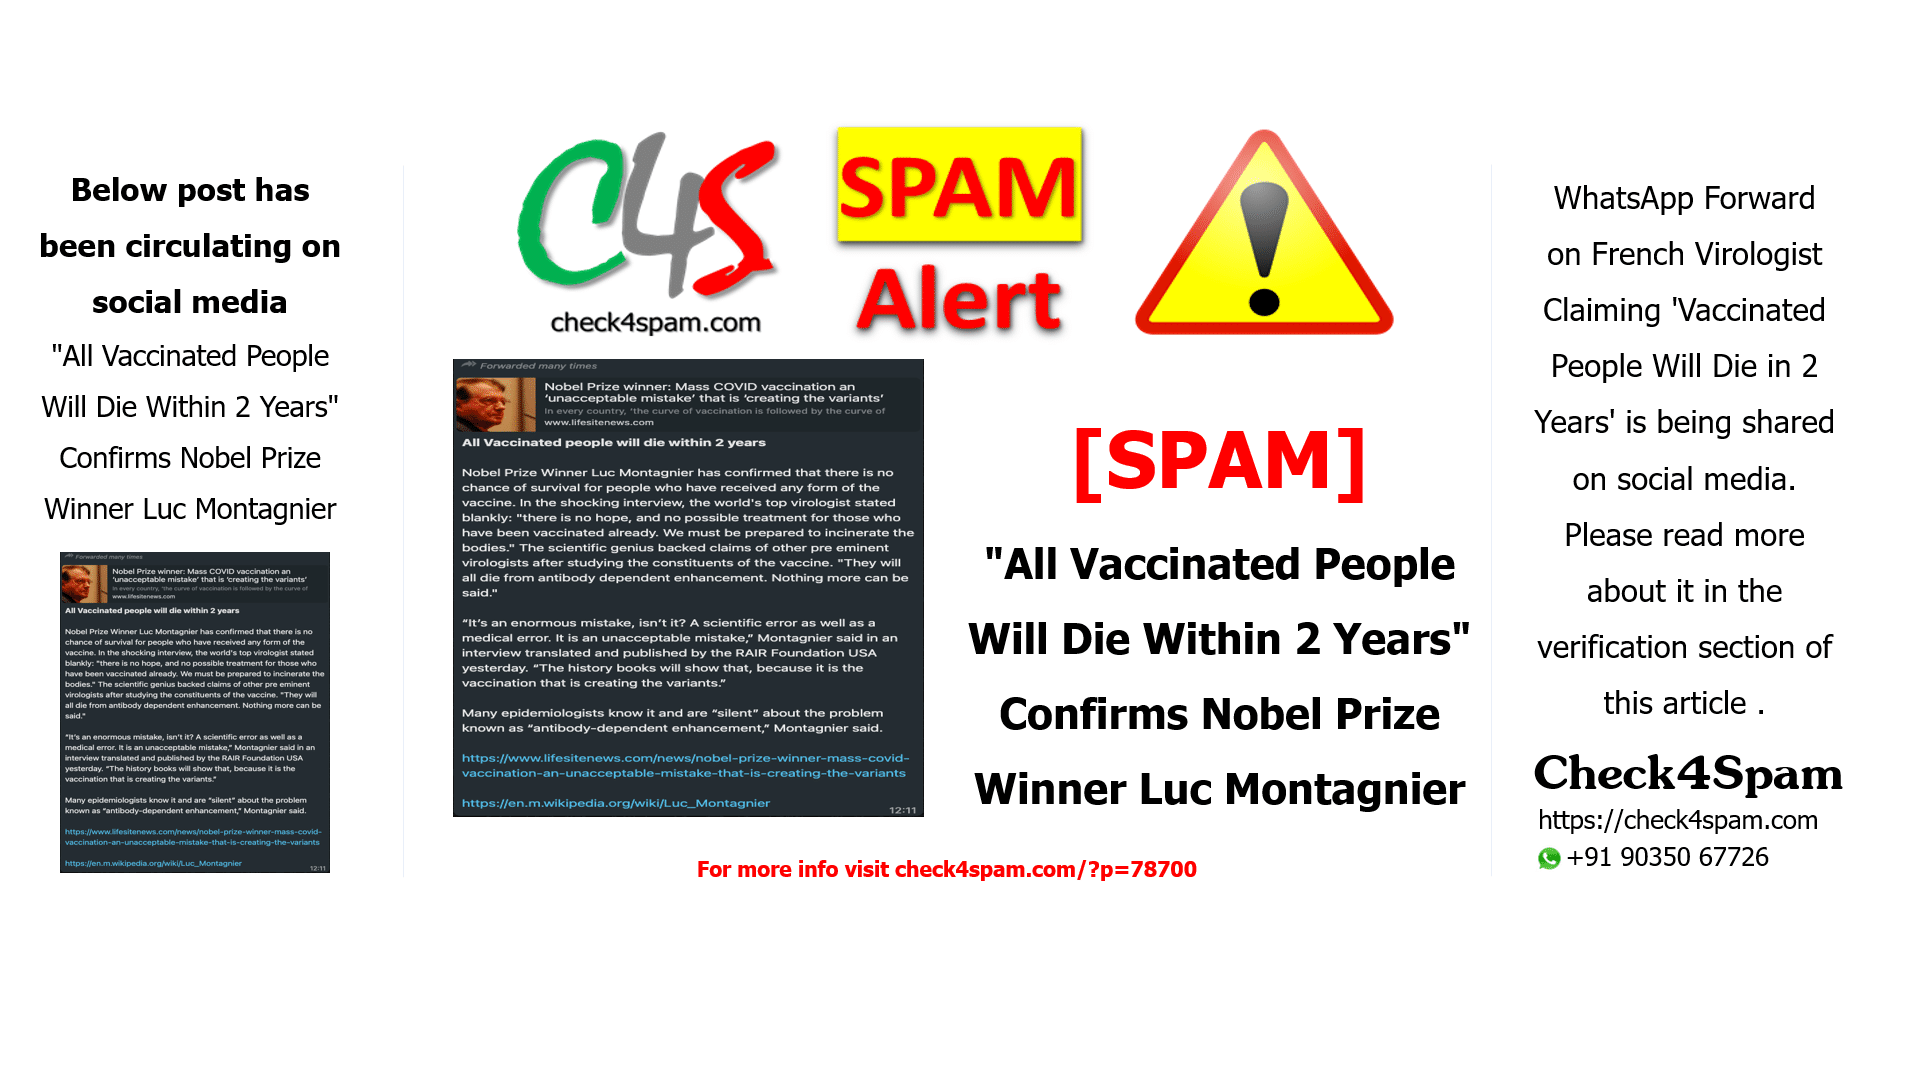 "All Vaccinated People Will Die Within 2 Years" Confirms Nobel Prize Winner Luc Montagnier